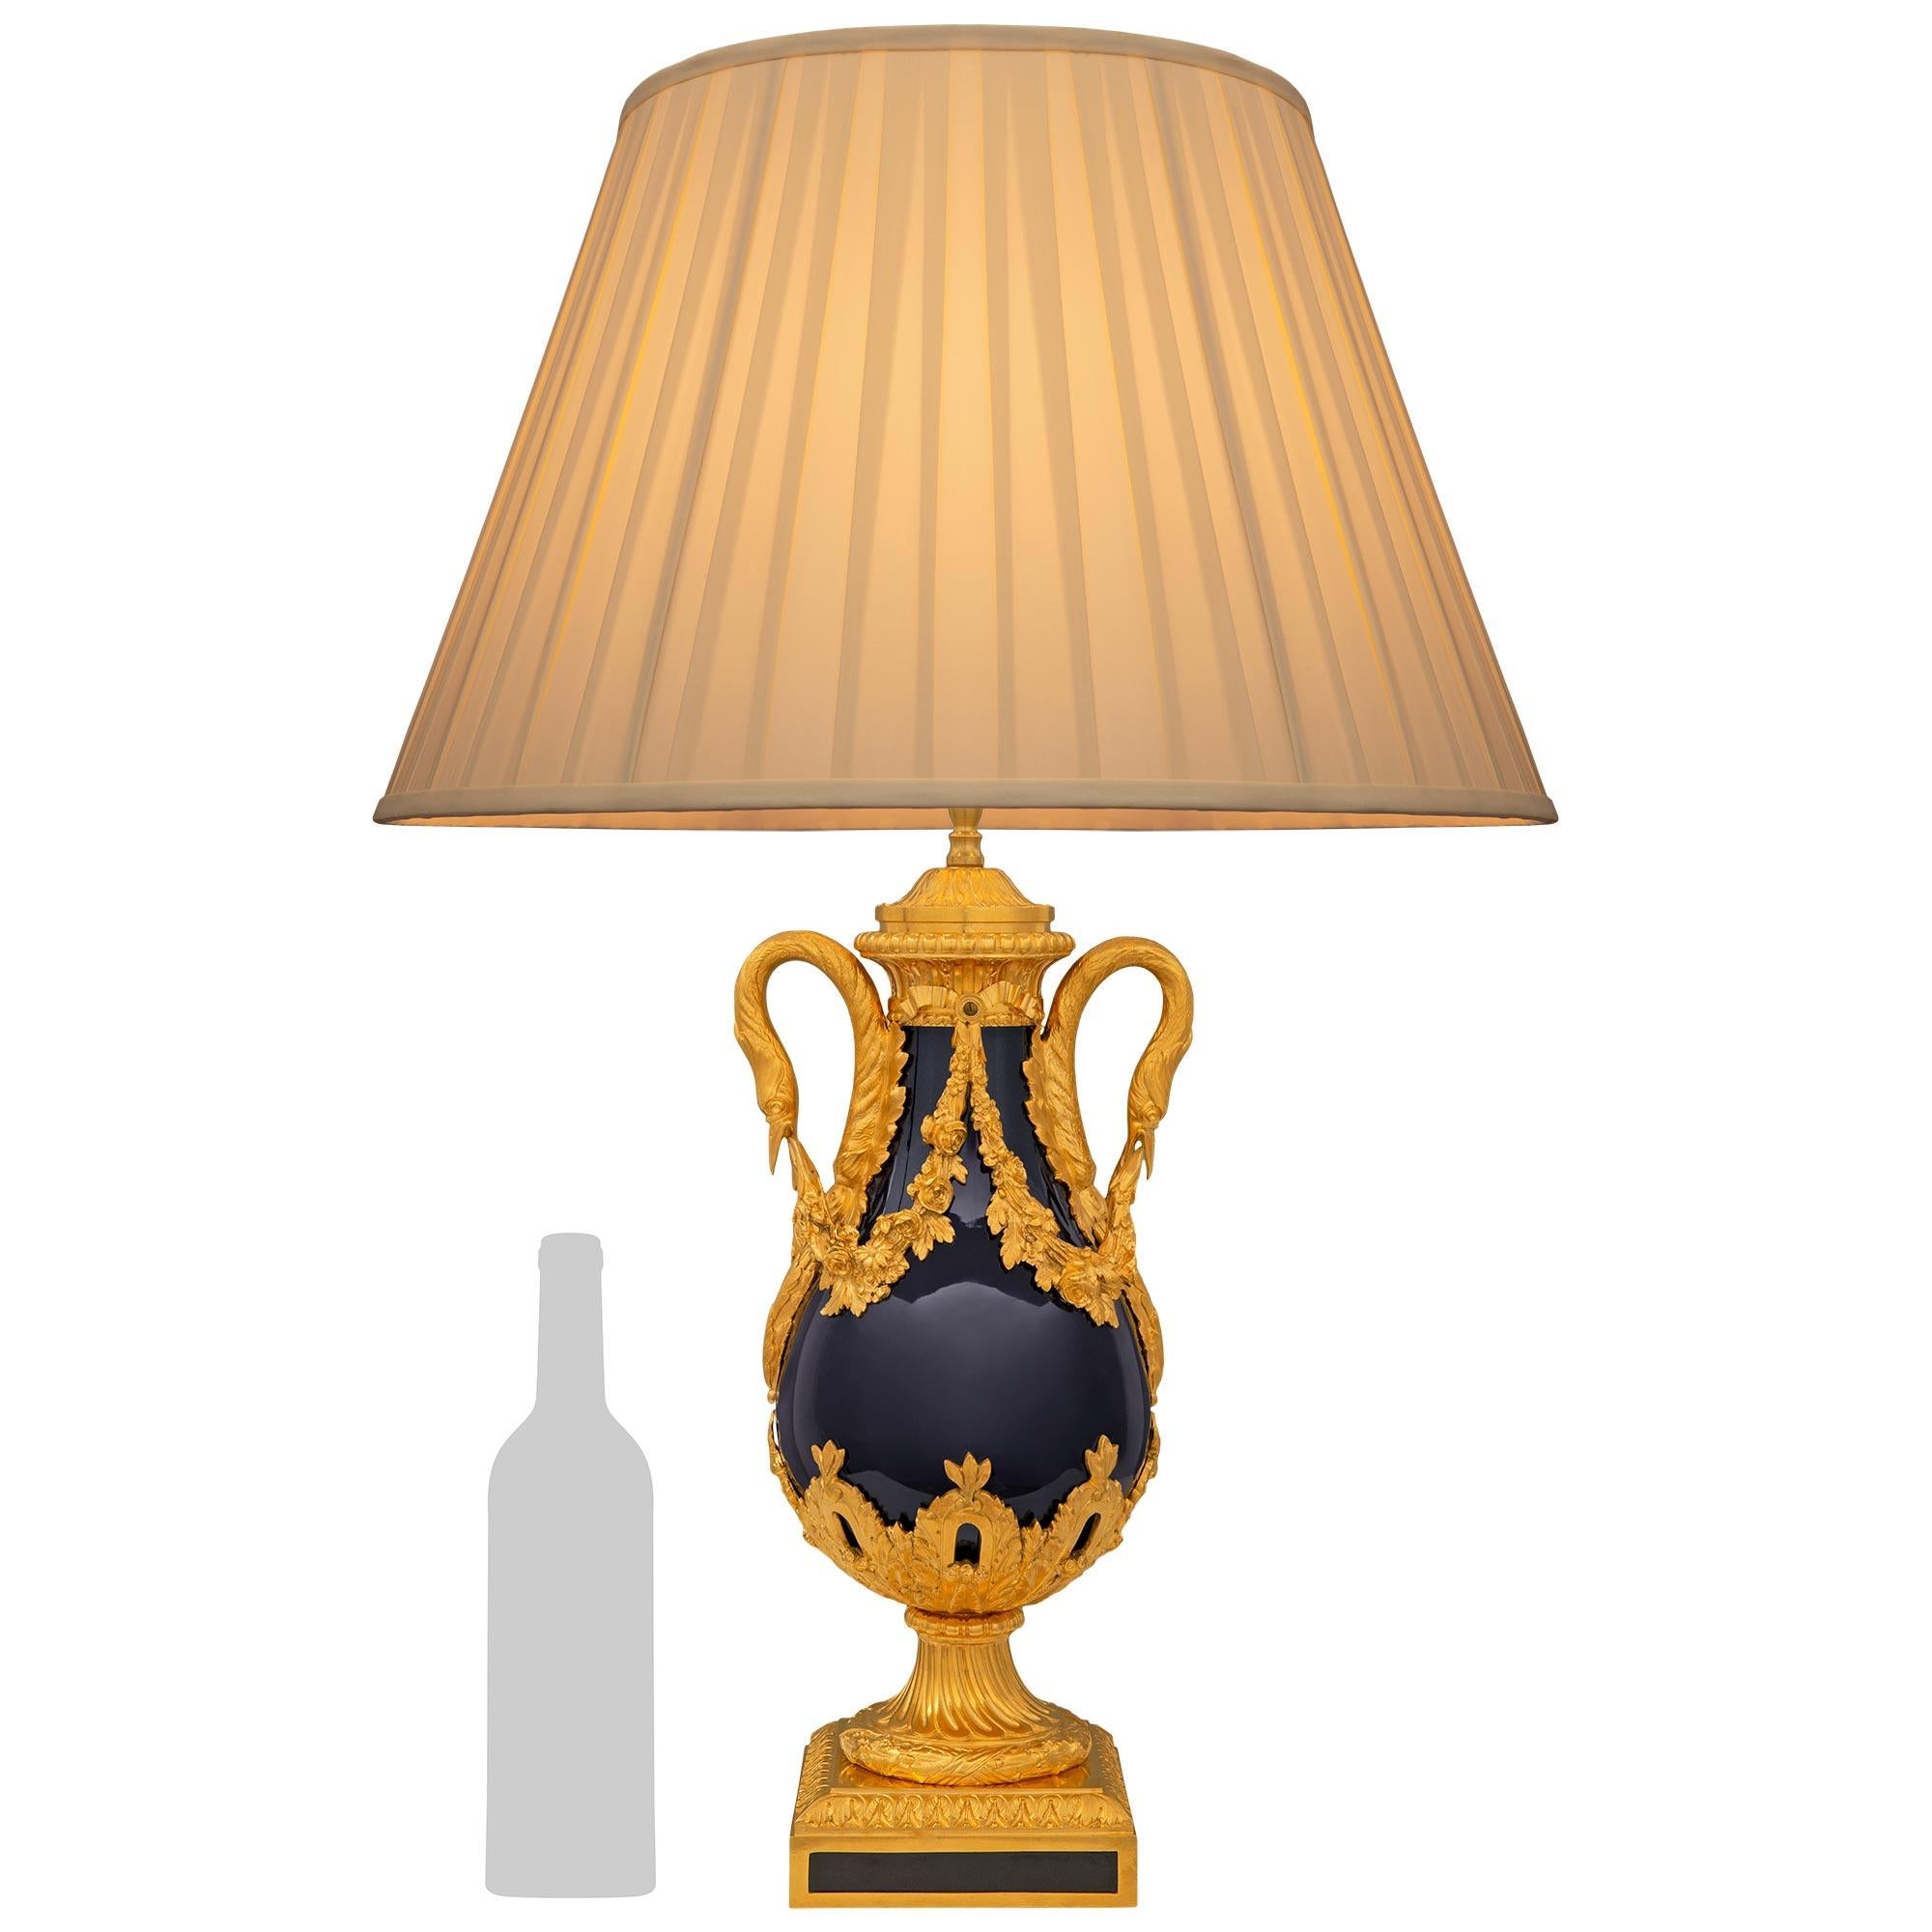 A striking and very high quality French 19th century Louis XVI st. cobalt blue Sèvres porcelain and Ormolu lamp. The lamp is raised by a square Ormolu base with elegant and unique fitted porcelain plaques at each side with a wrap around Coeur de Rai